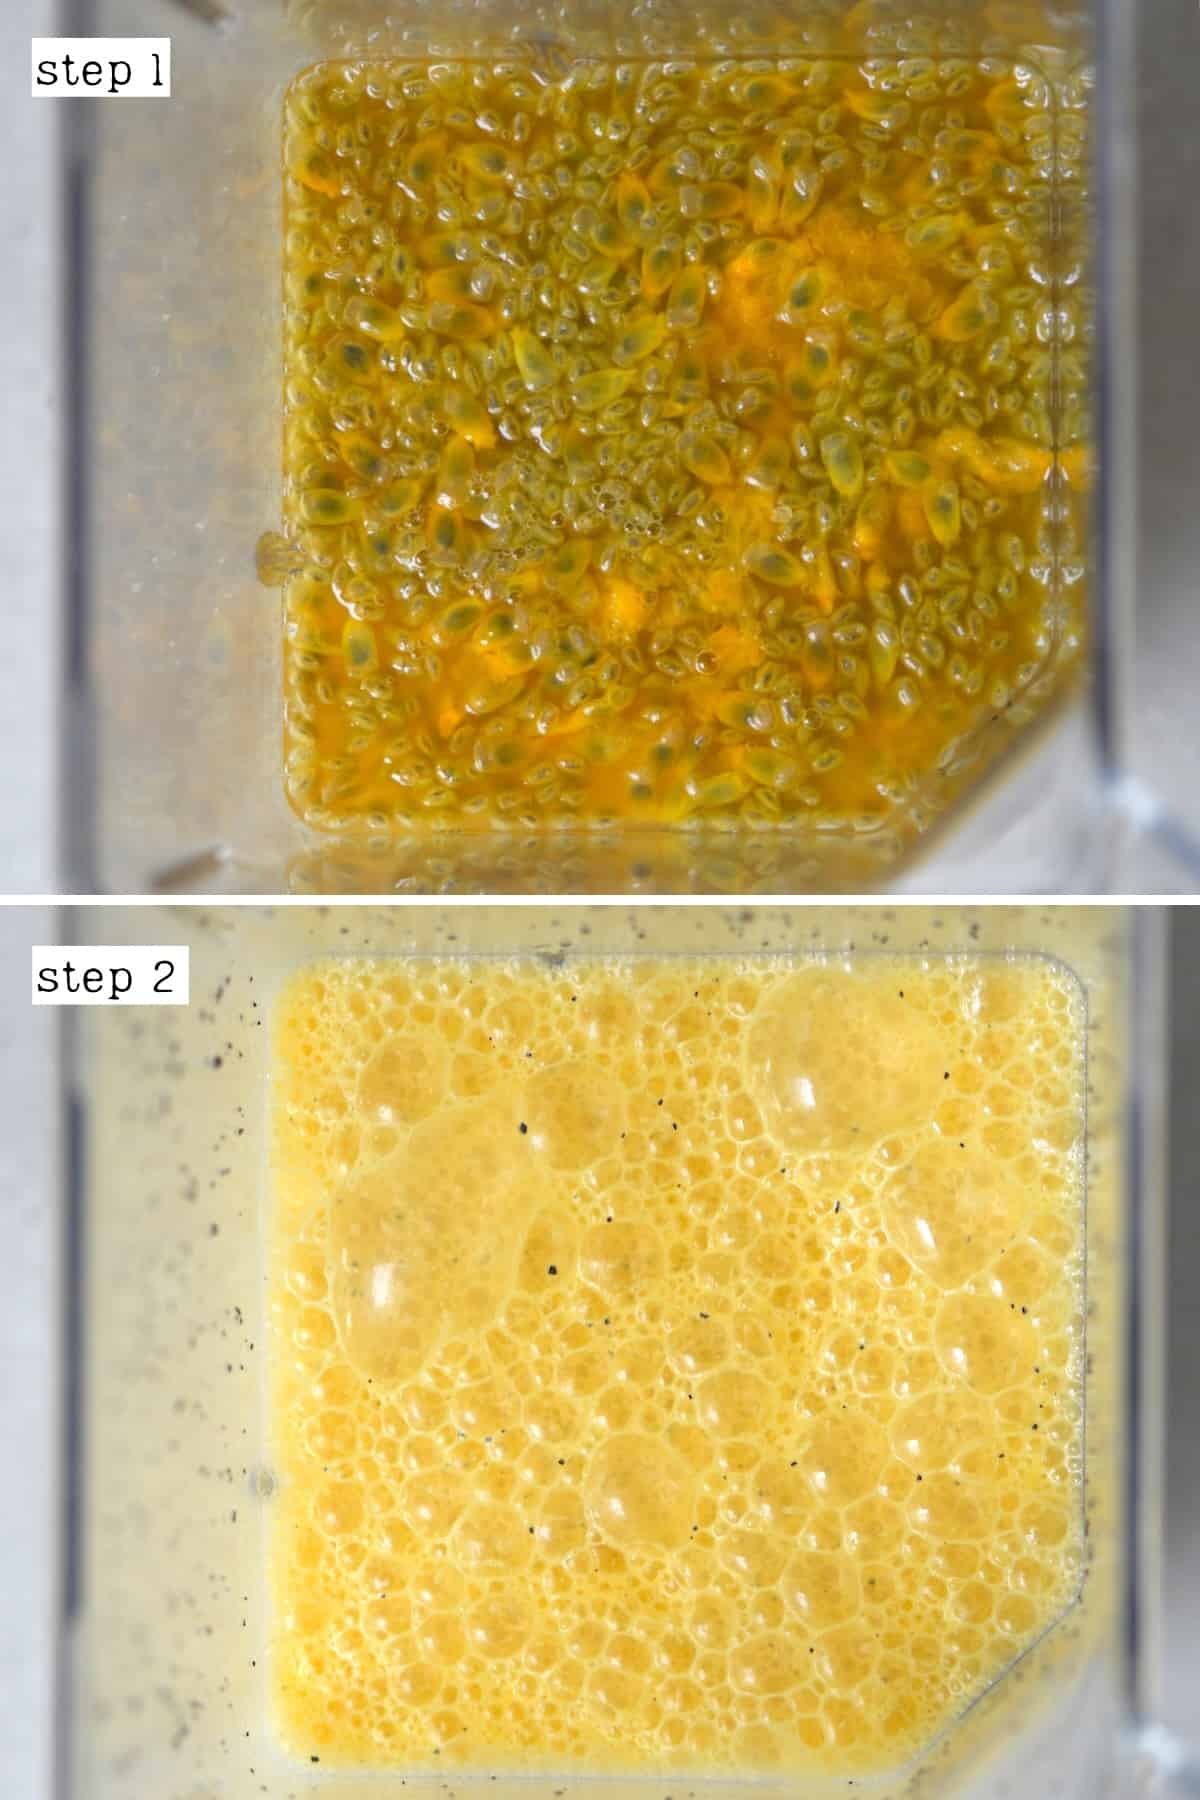 Before and after blending passion fruit